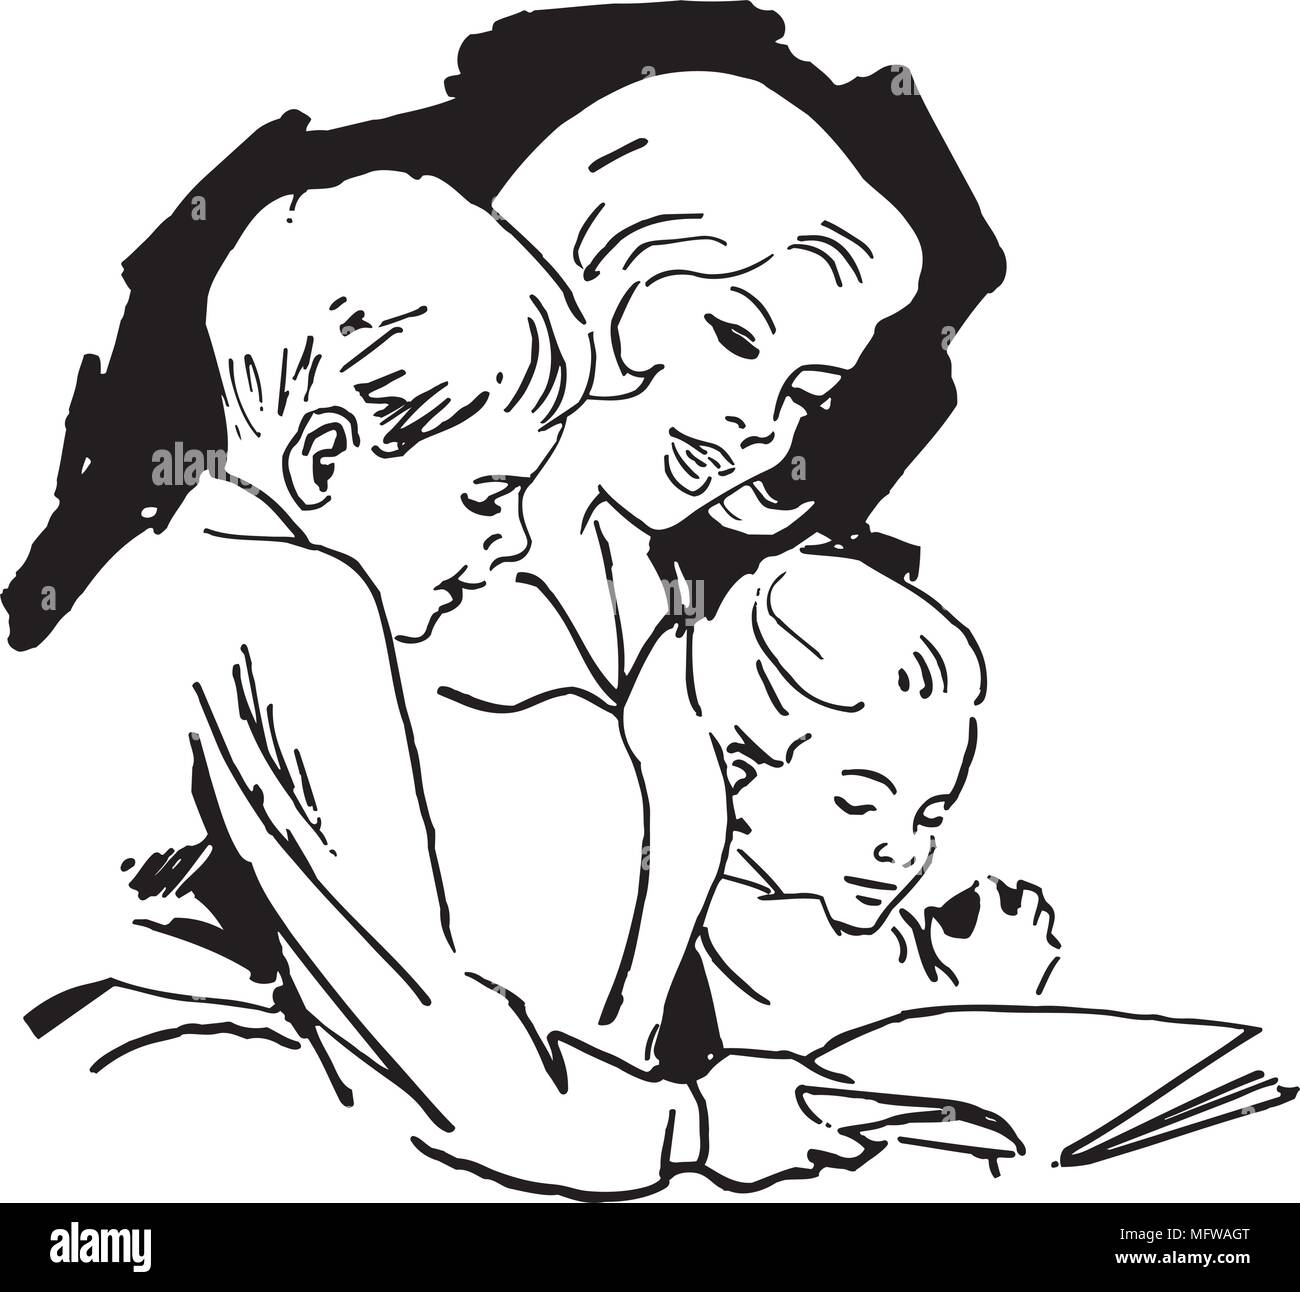 mother and child reading clipart